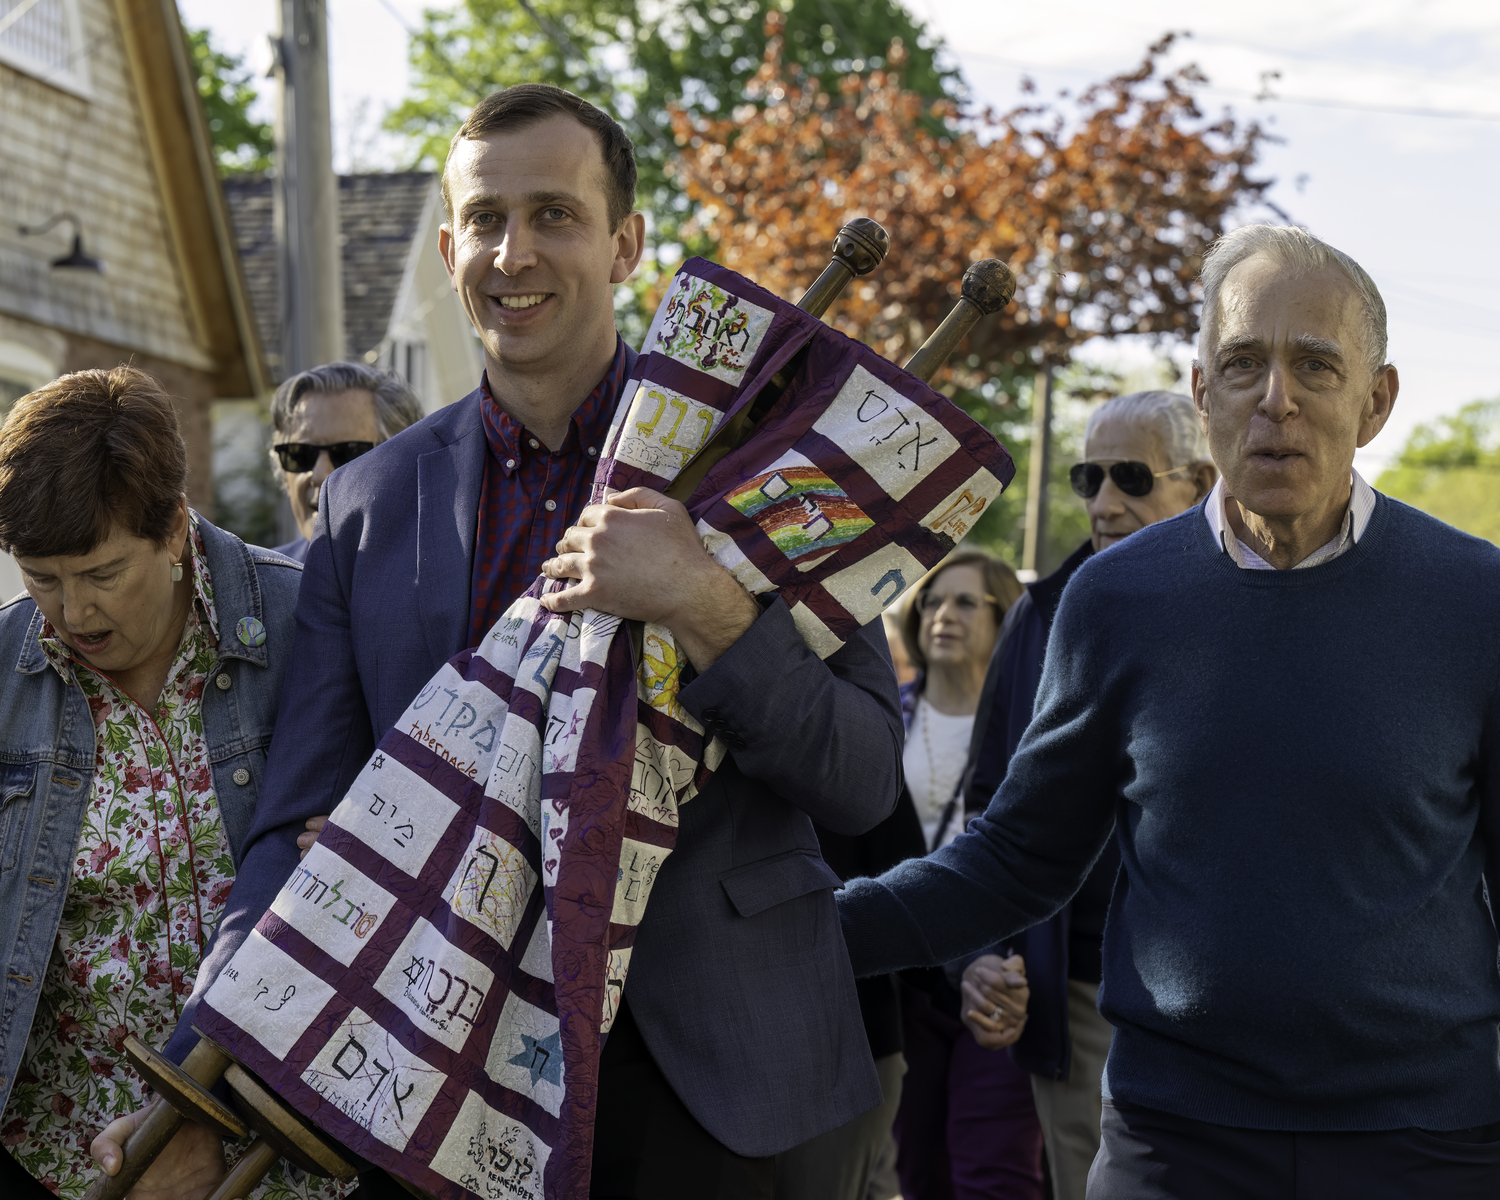 Nathaniel Oppenheimer, carrying a Torah, is accompanied by his mother, Leah Oppenheimer, and father, Dr. John Oppenheimer. MARIANNE BARNETT